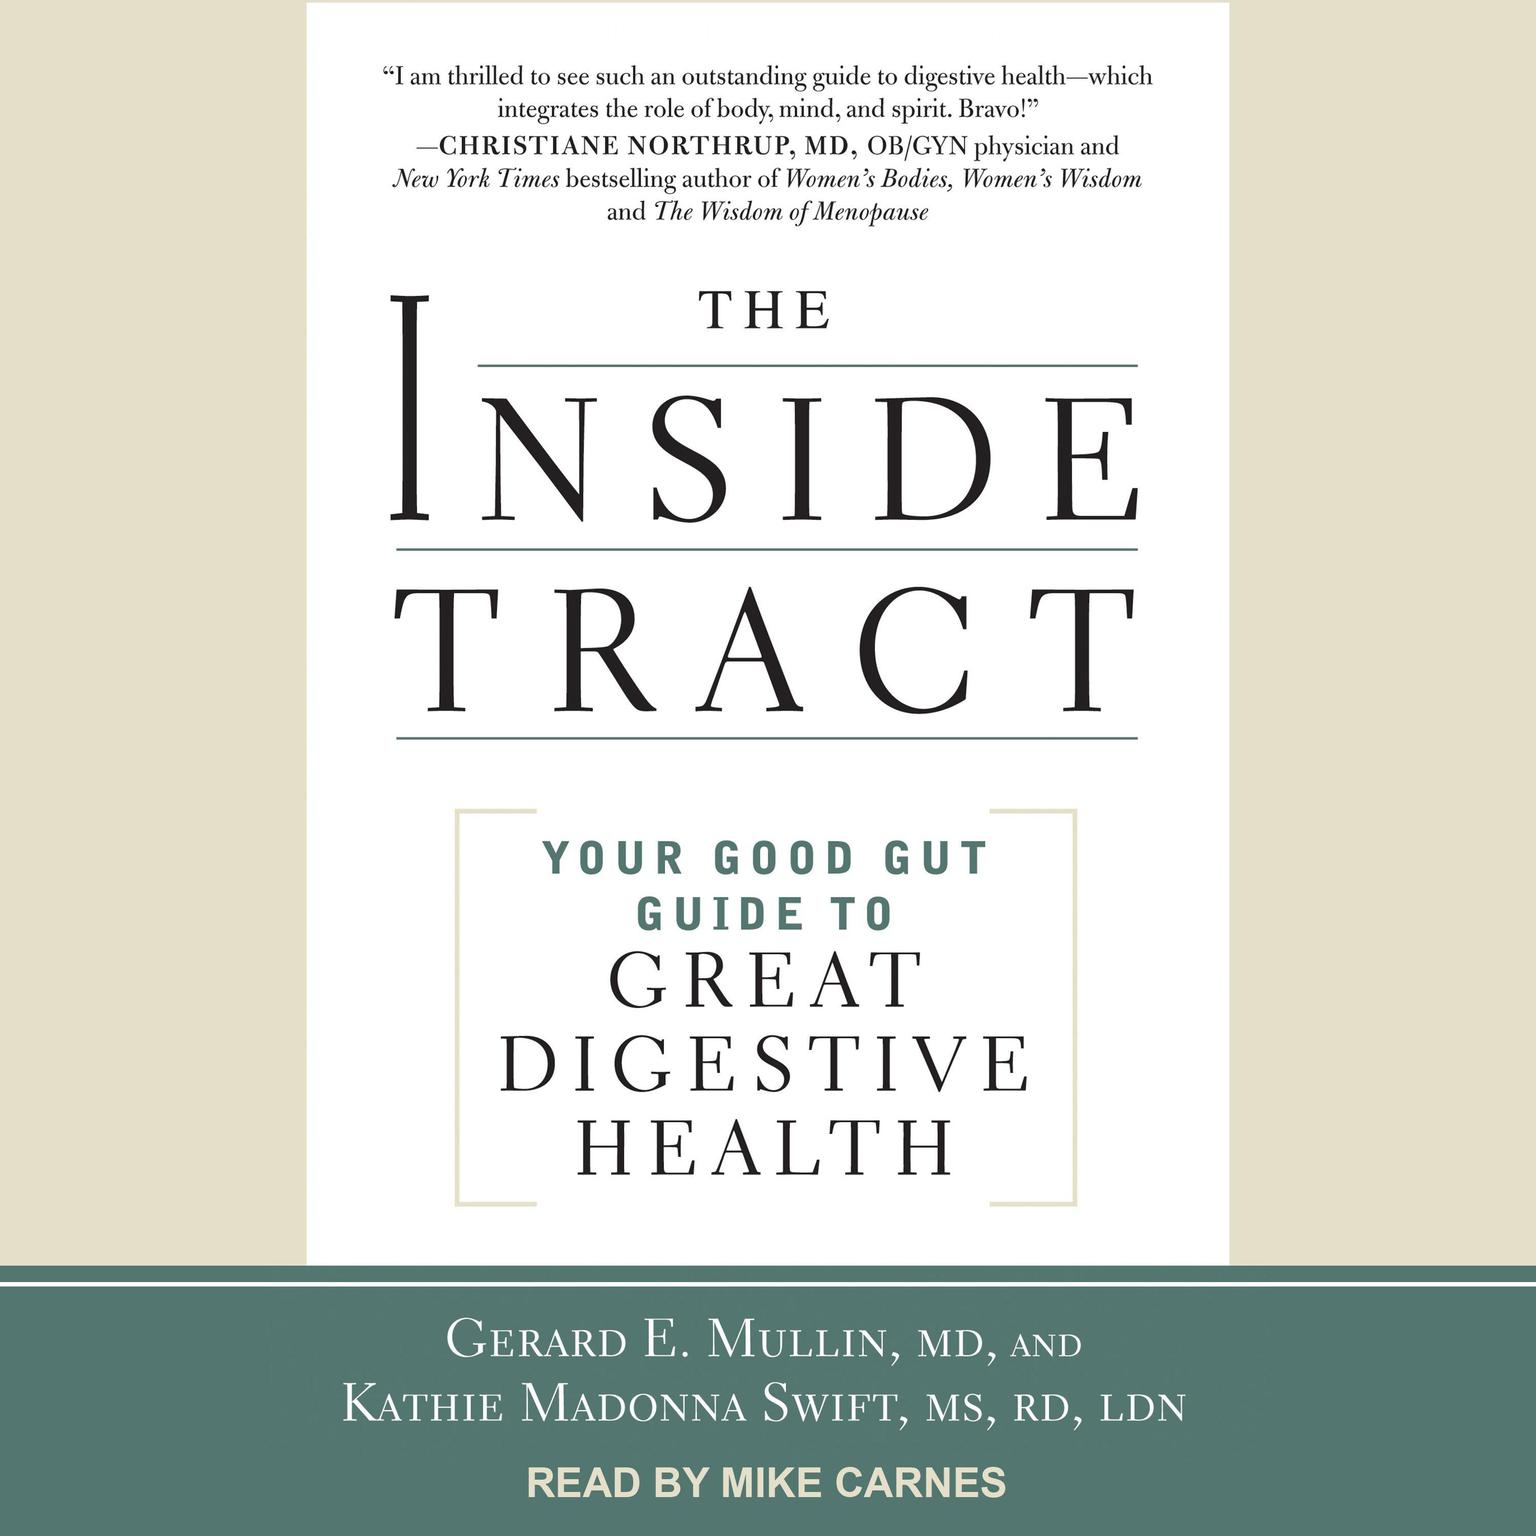 The Inside Tract: Your Good Gut Guide to Great Digestive Health Audiobook, by Gerard E. Mullin